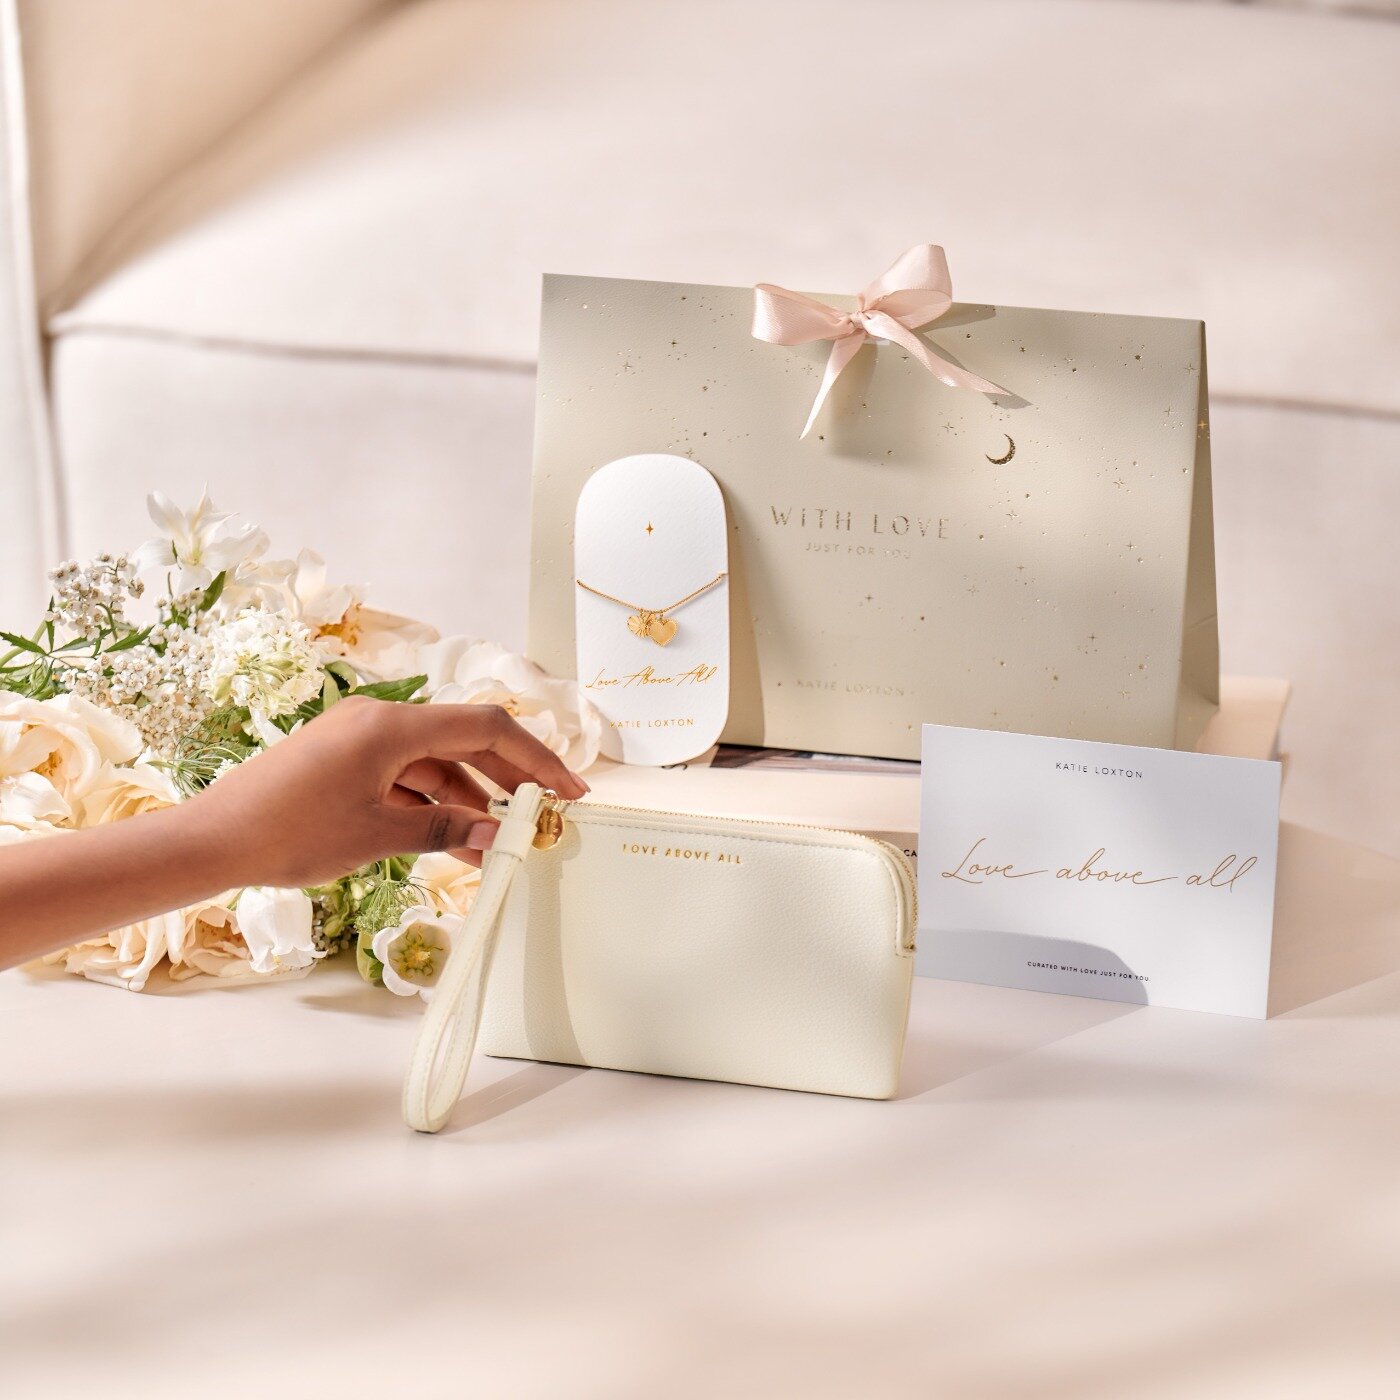 Pouch And Bracelet Gift Set - With Love - Katie Loxton